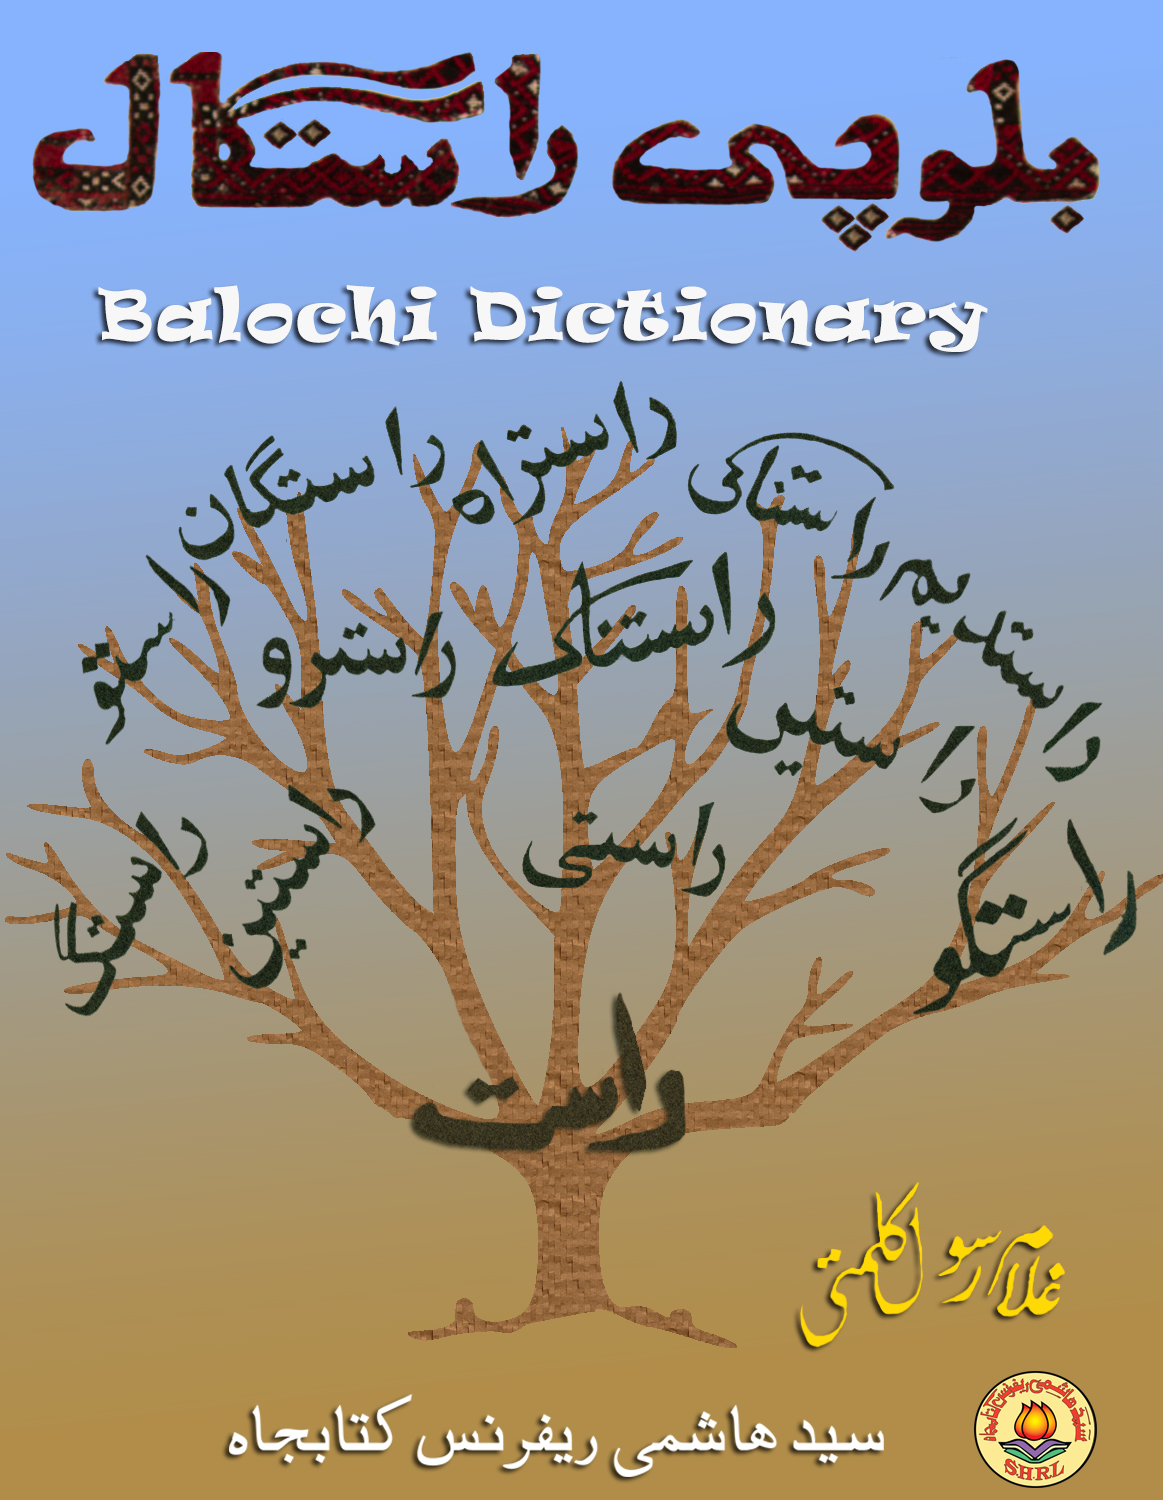 You are currently viewing بلوچی راستگال Balochi Dictionary